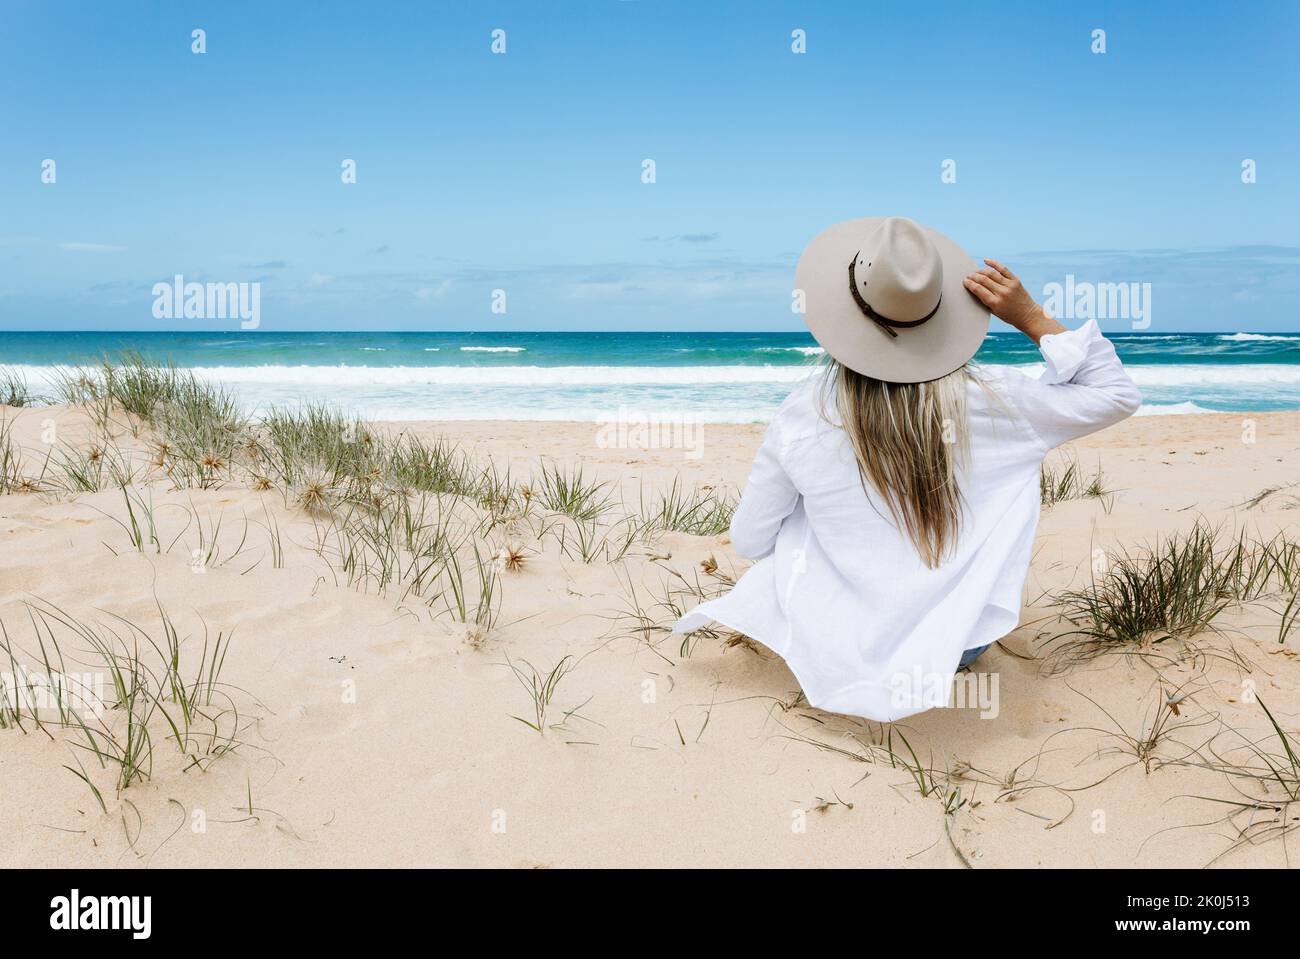 Carefree woman on holiday in flowing white shirt over bikini swimming costume, sits on a clean sandy beach with blue skies.  She is wearing a sun hat. Stock Photo